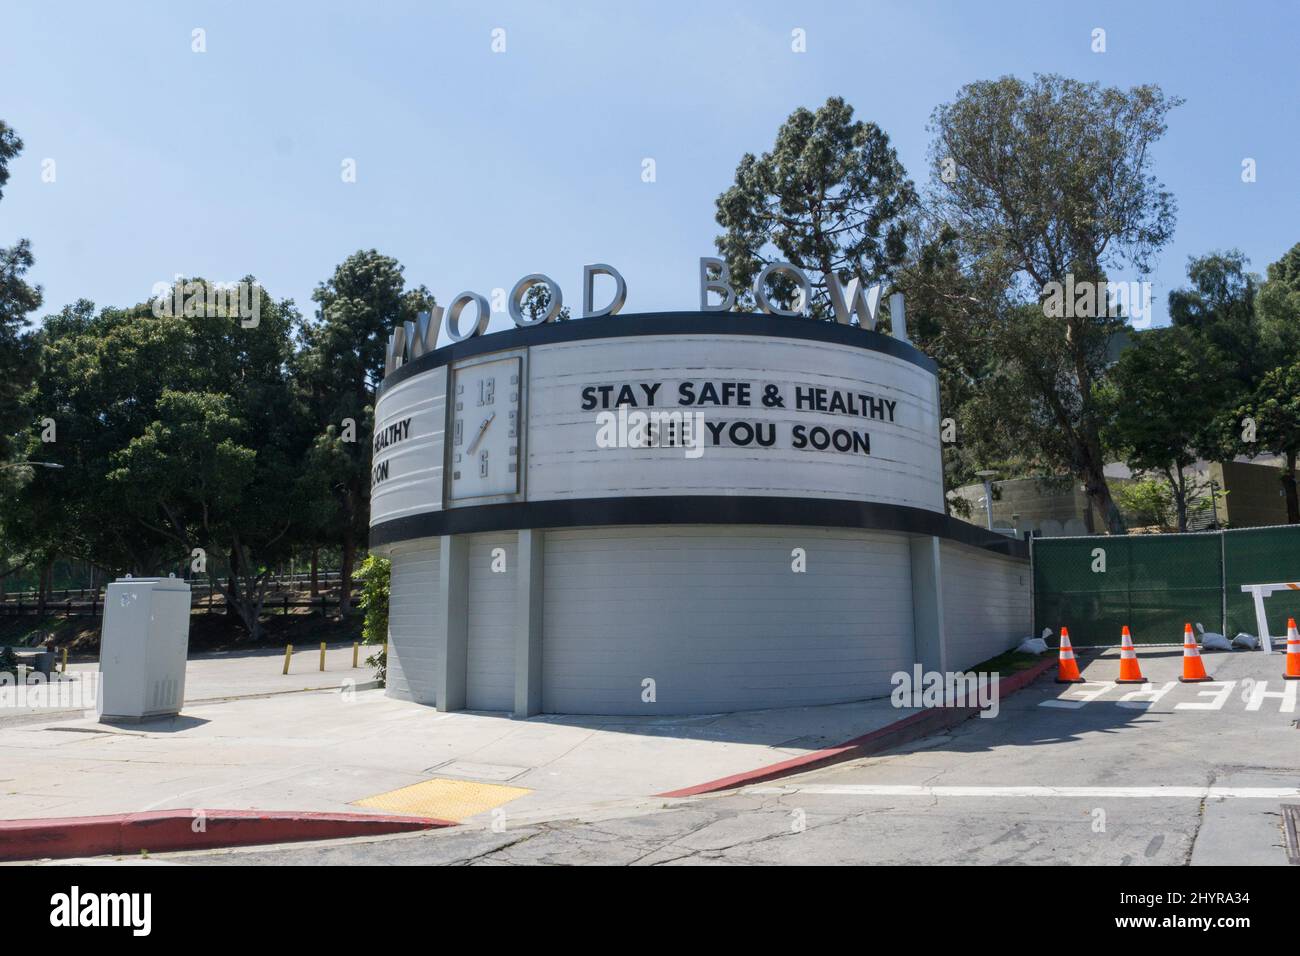 Hollywood Bowl during the Hollywood Covid 19 lockdown on April 11, 2020 in Hollywood, CA. Stock Photo